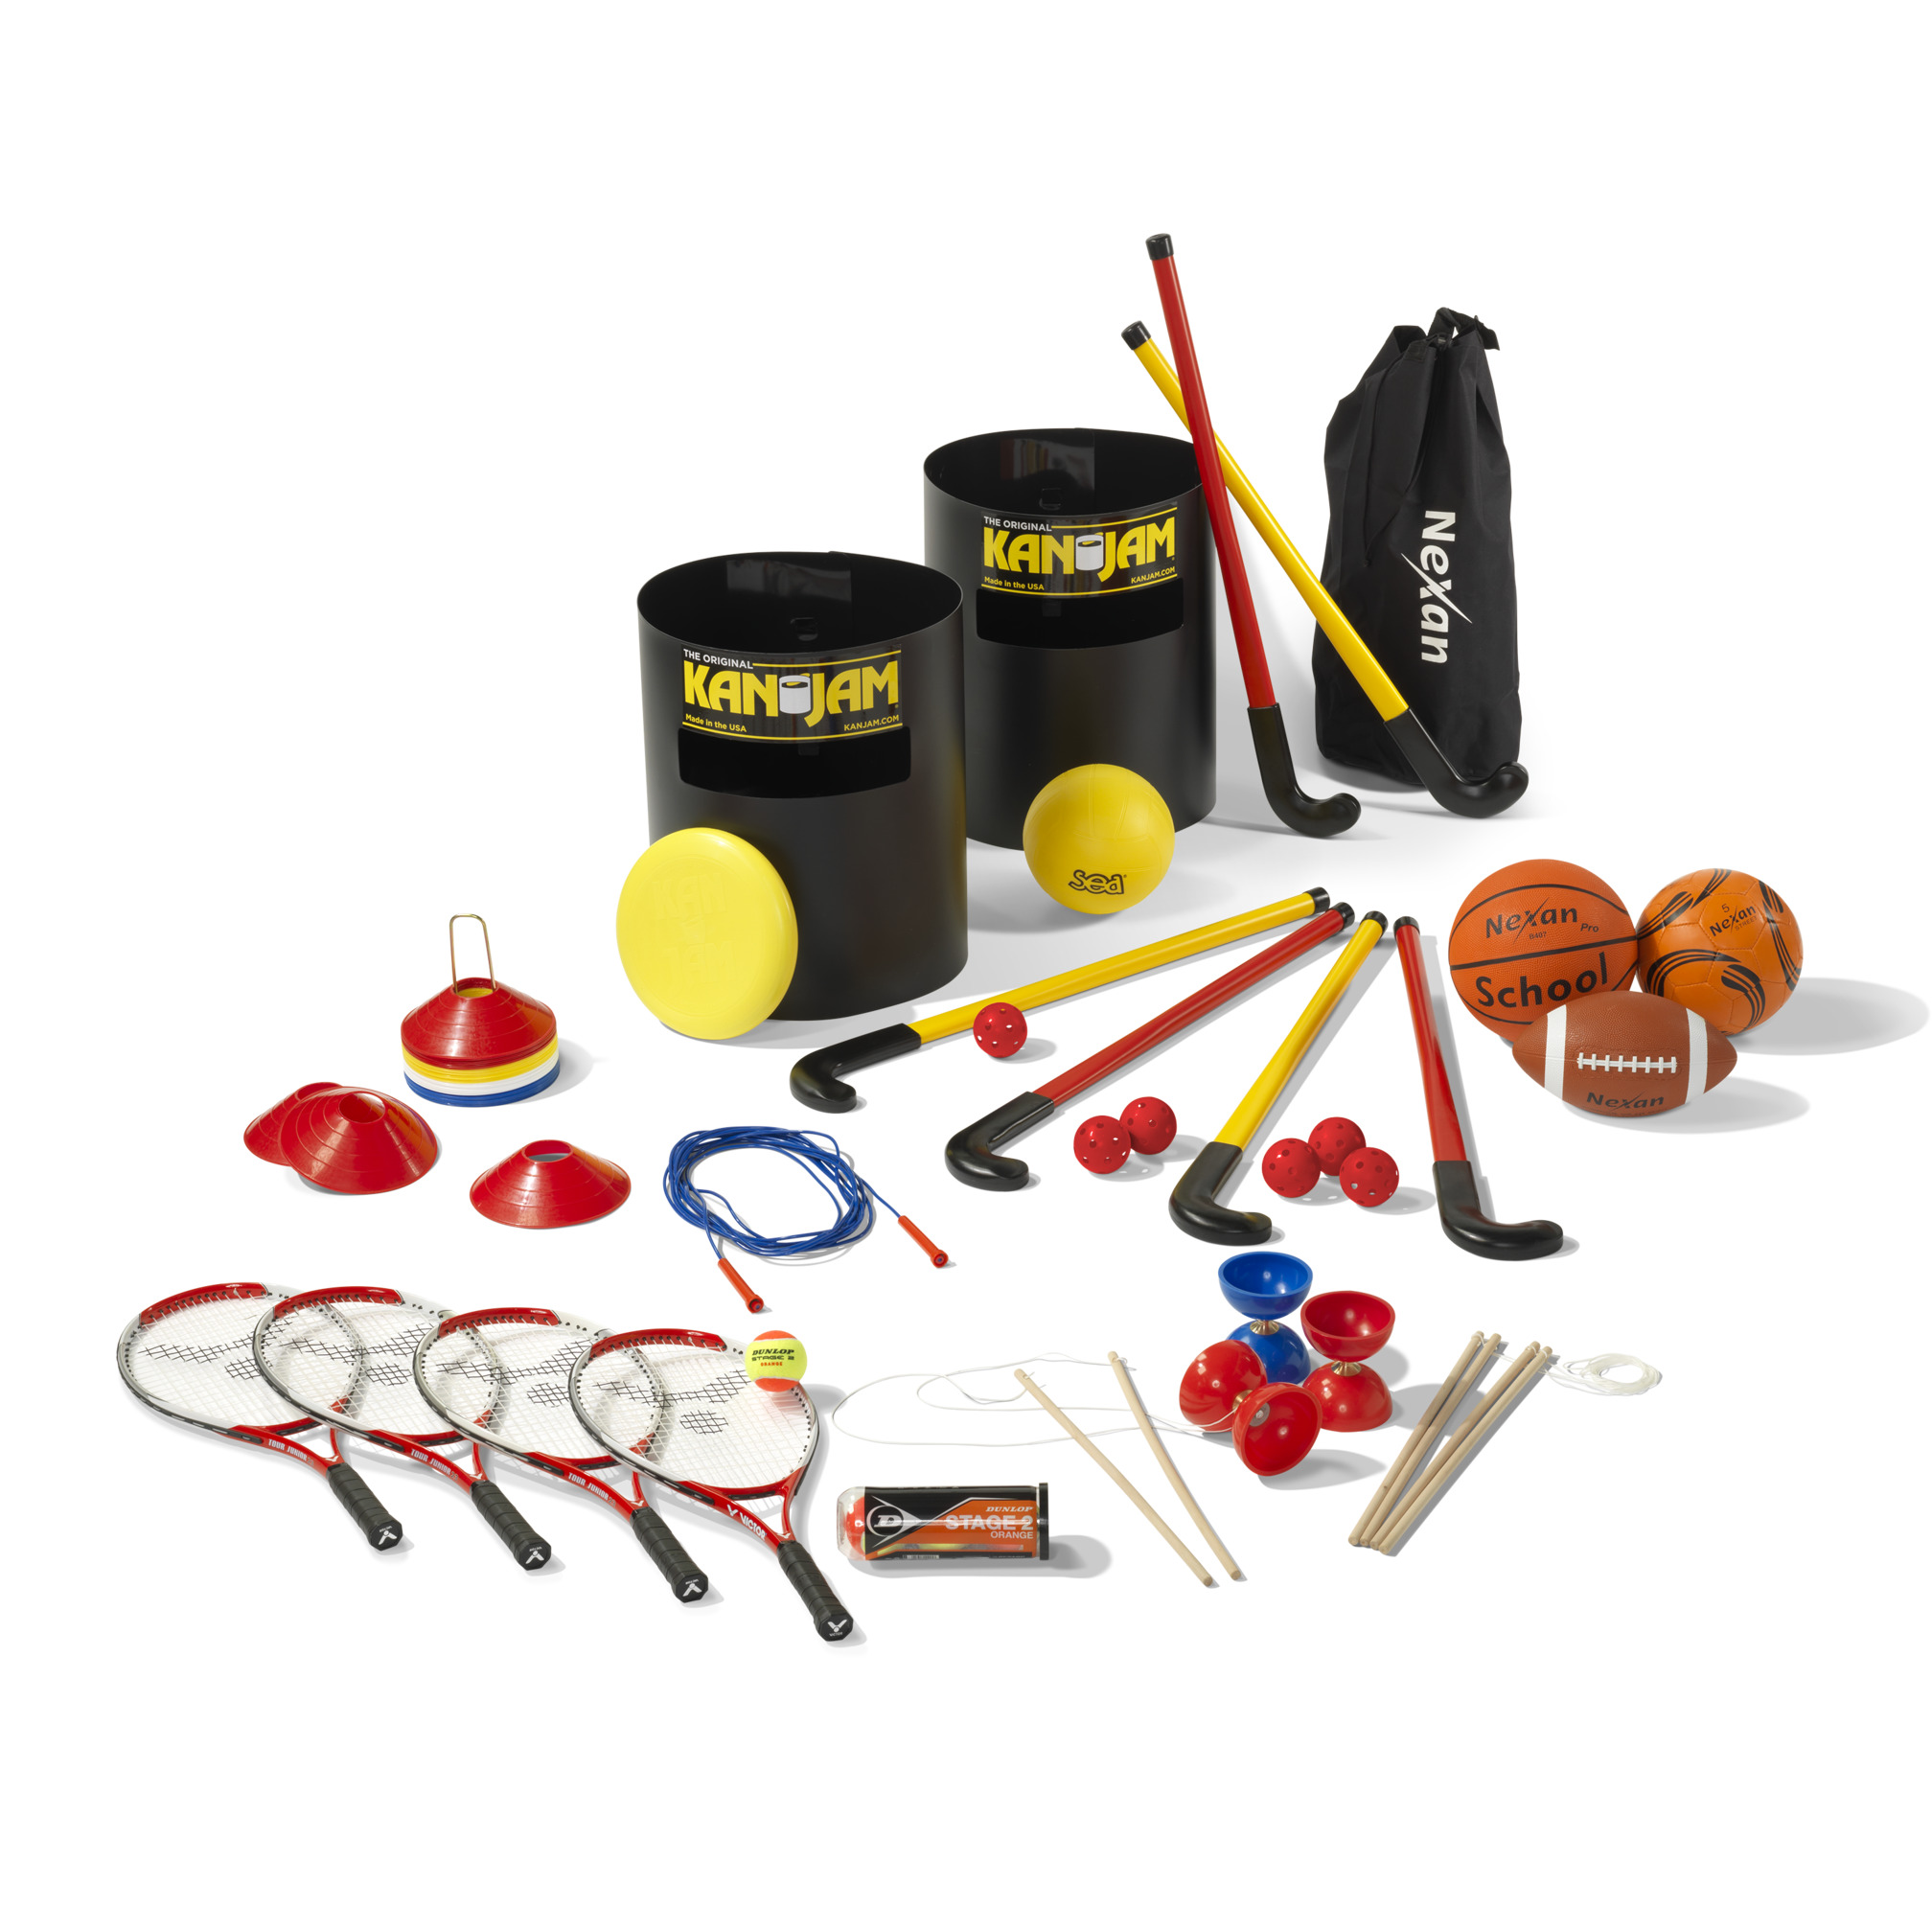 Value-for-money set of secondary school playground items